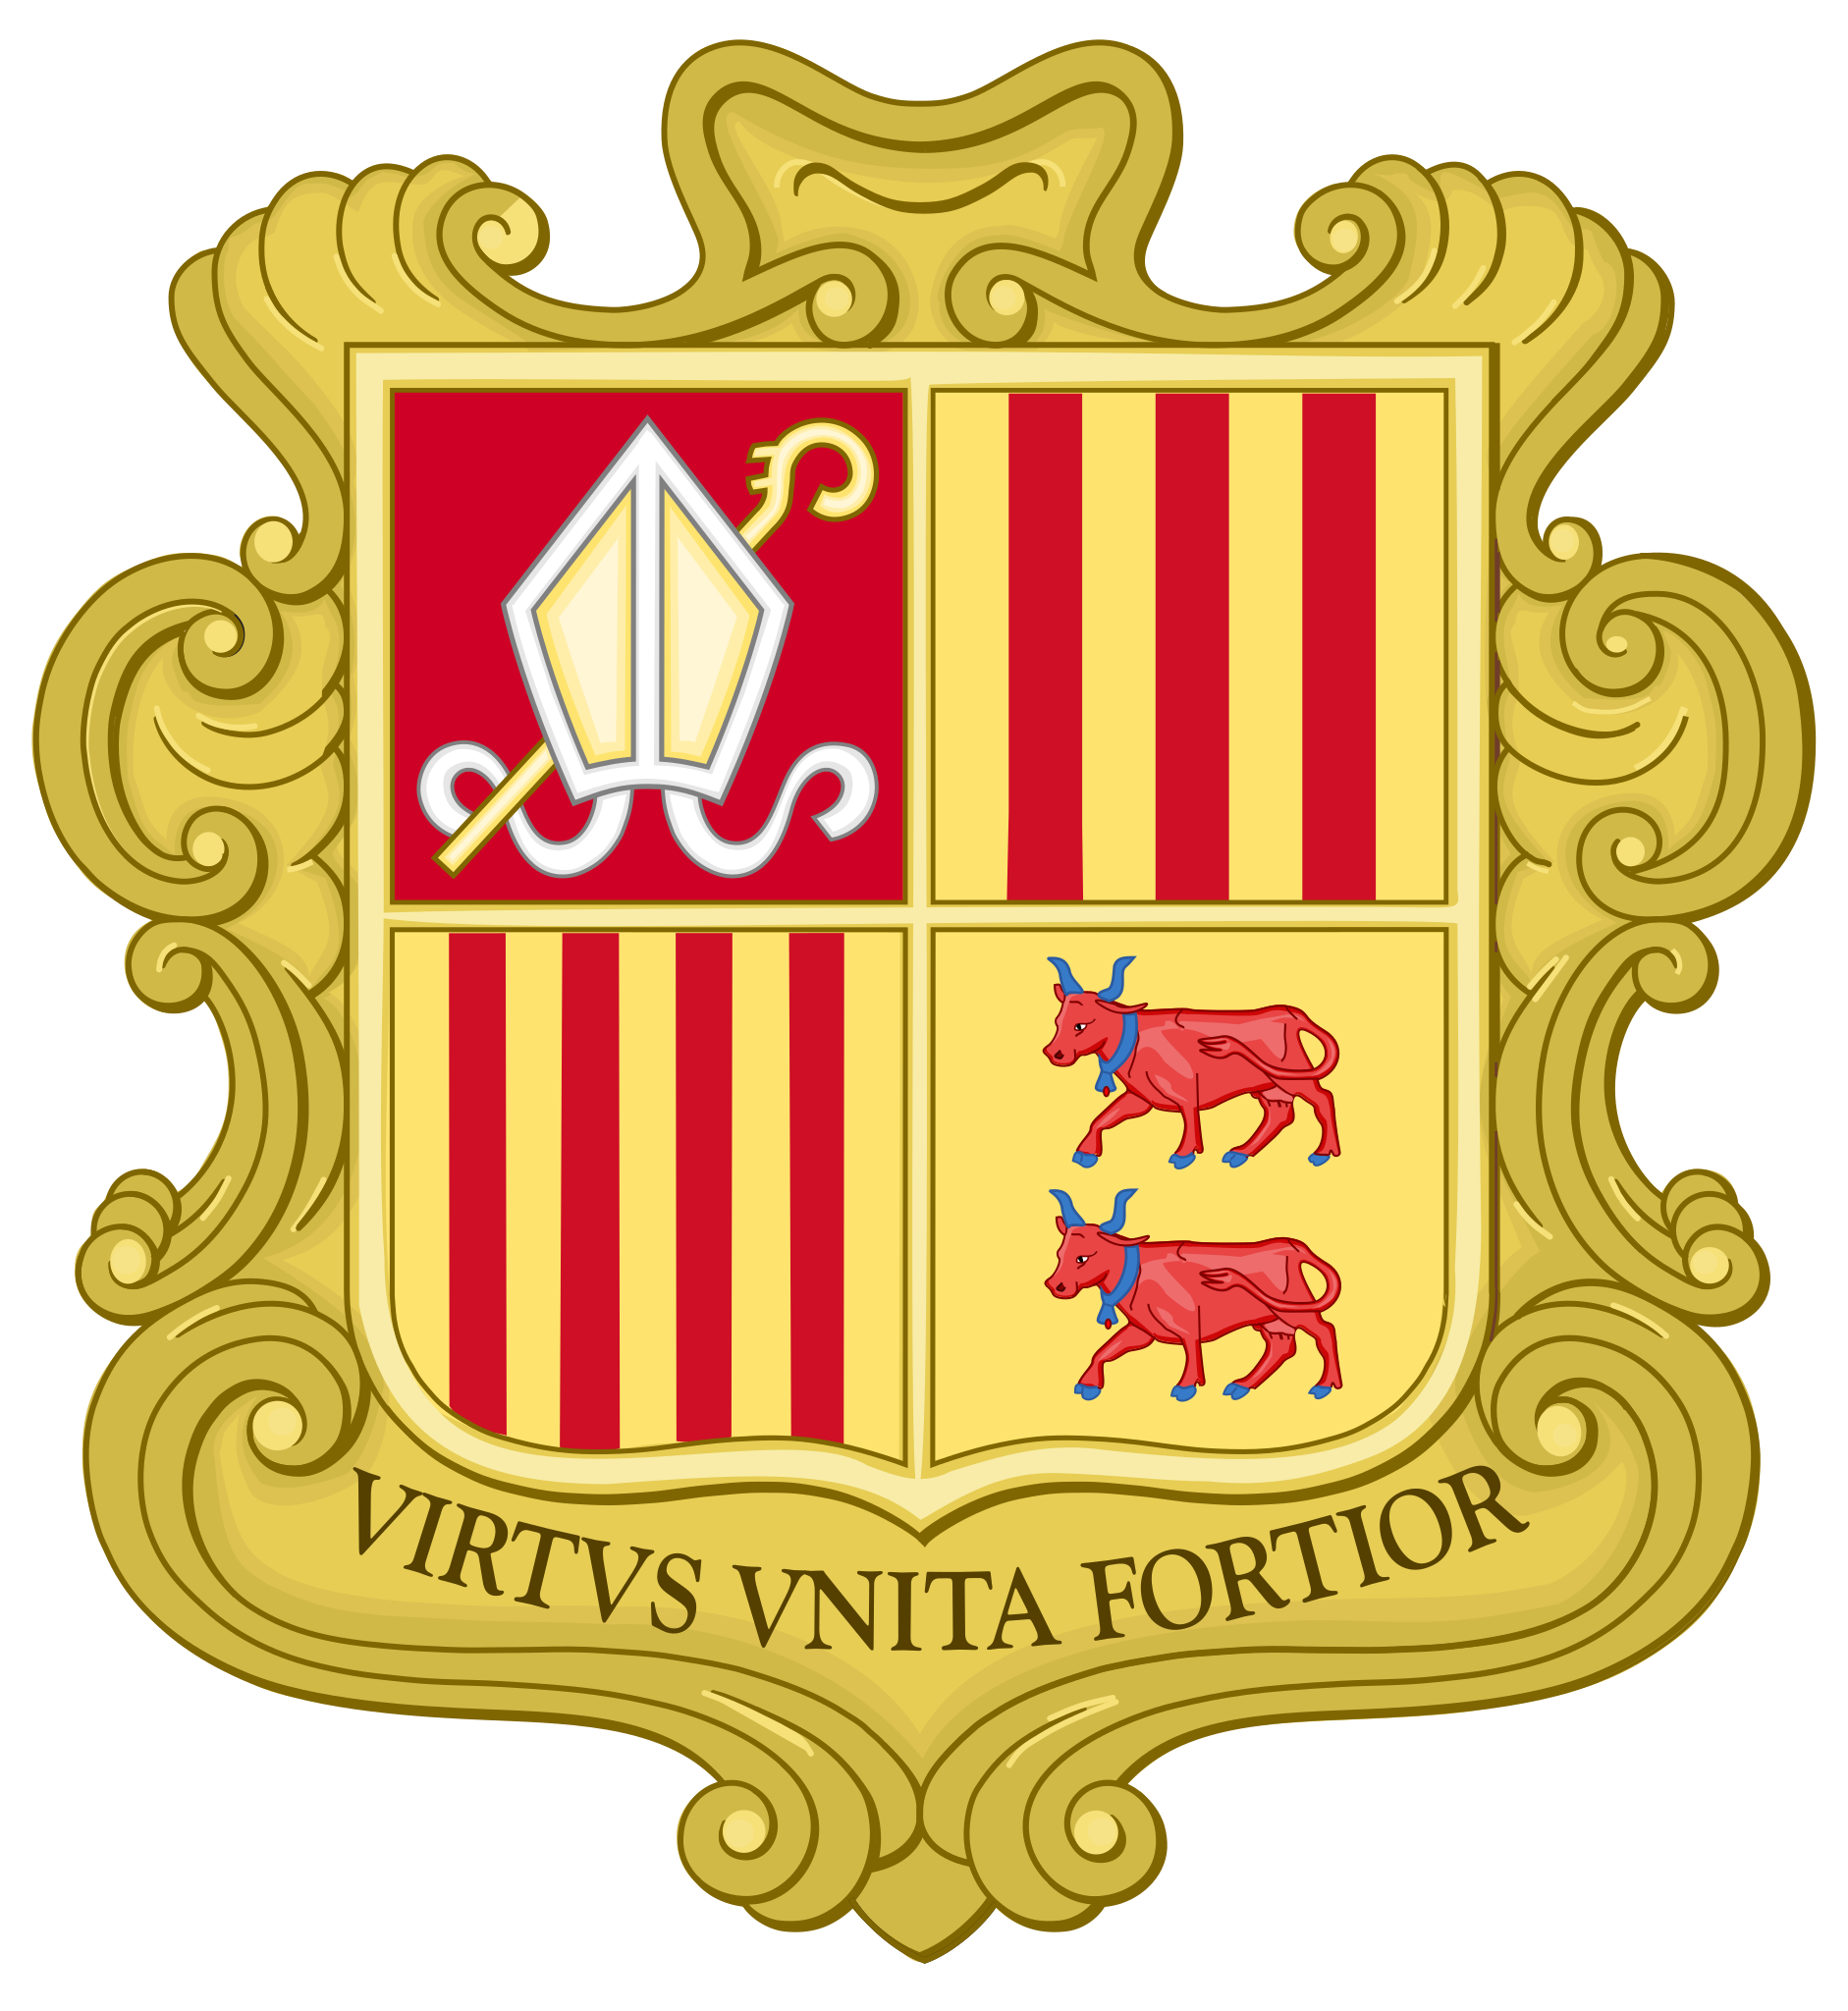 Coat of Arms of Andorra